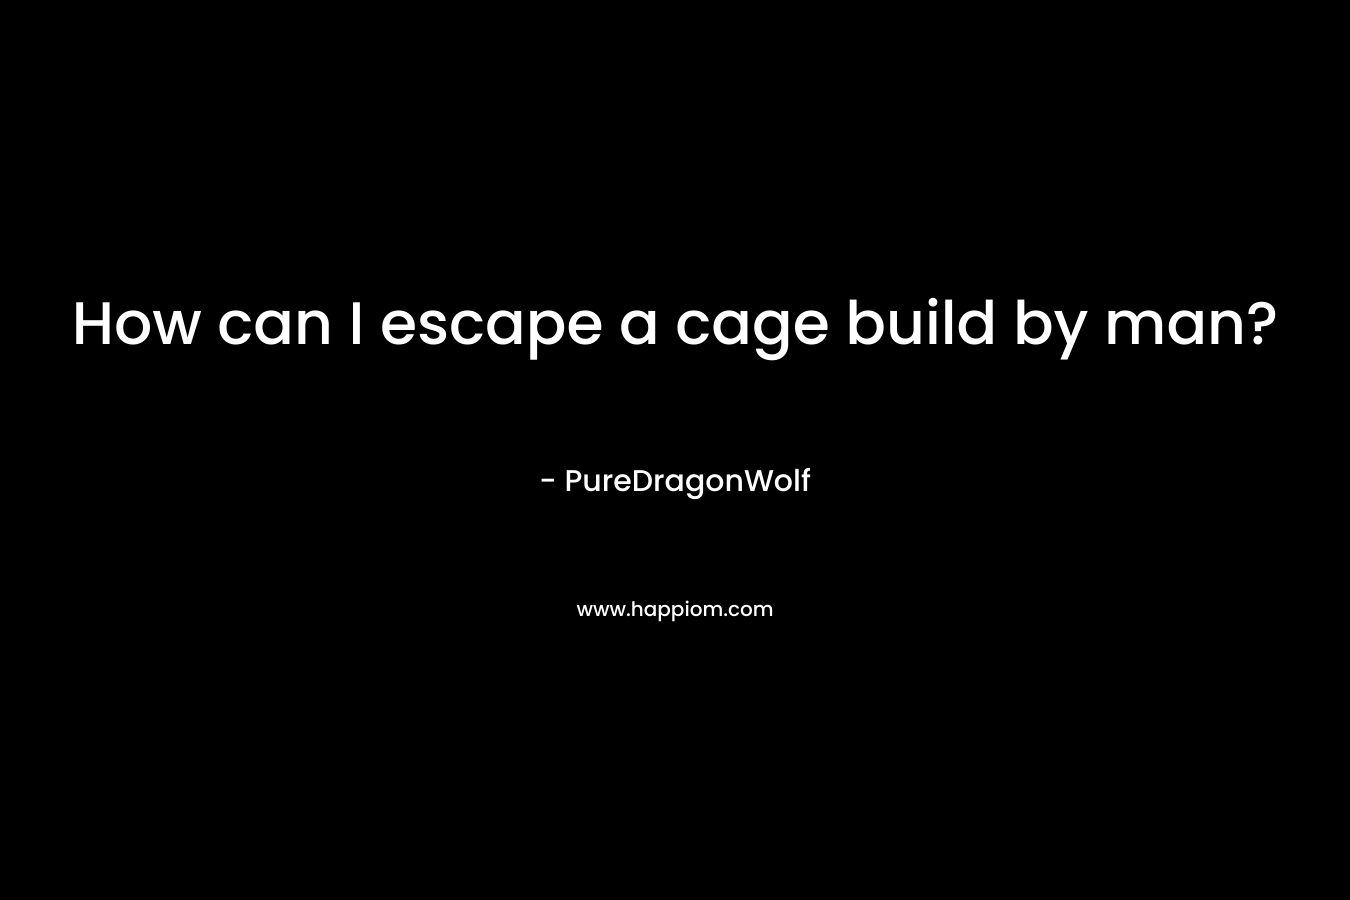 How can I escape a cage build by man?